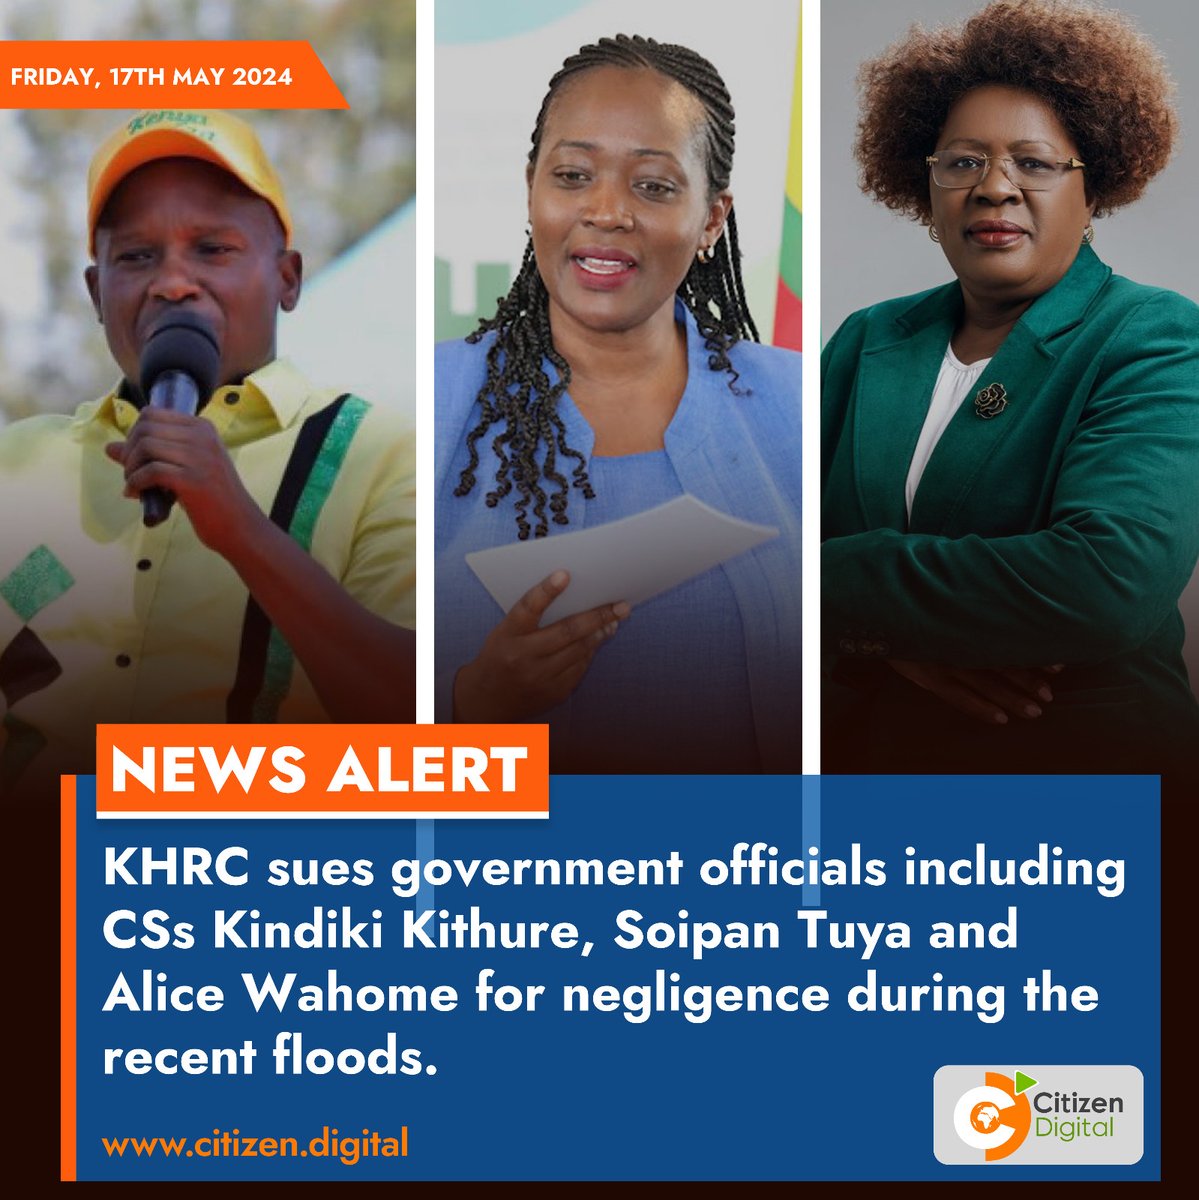 KHRC sues government officials including CSs Kindiki Kithure, Soipan Tuya and Alice Wahome for negligence during the recent floods